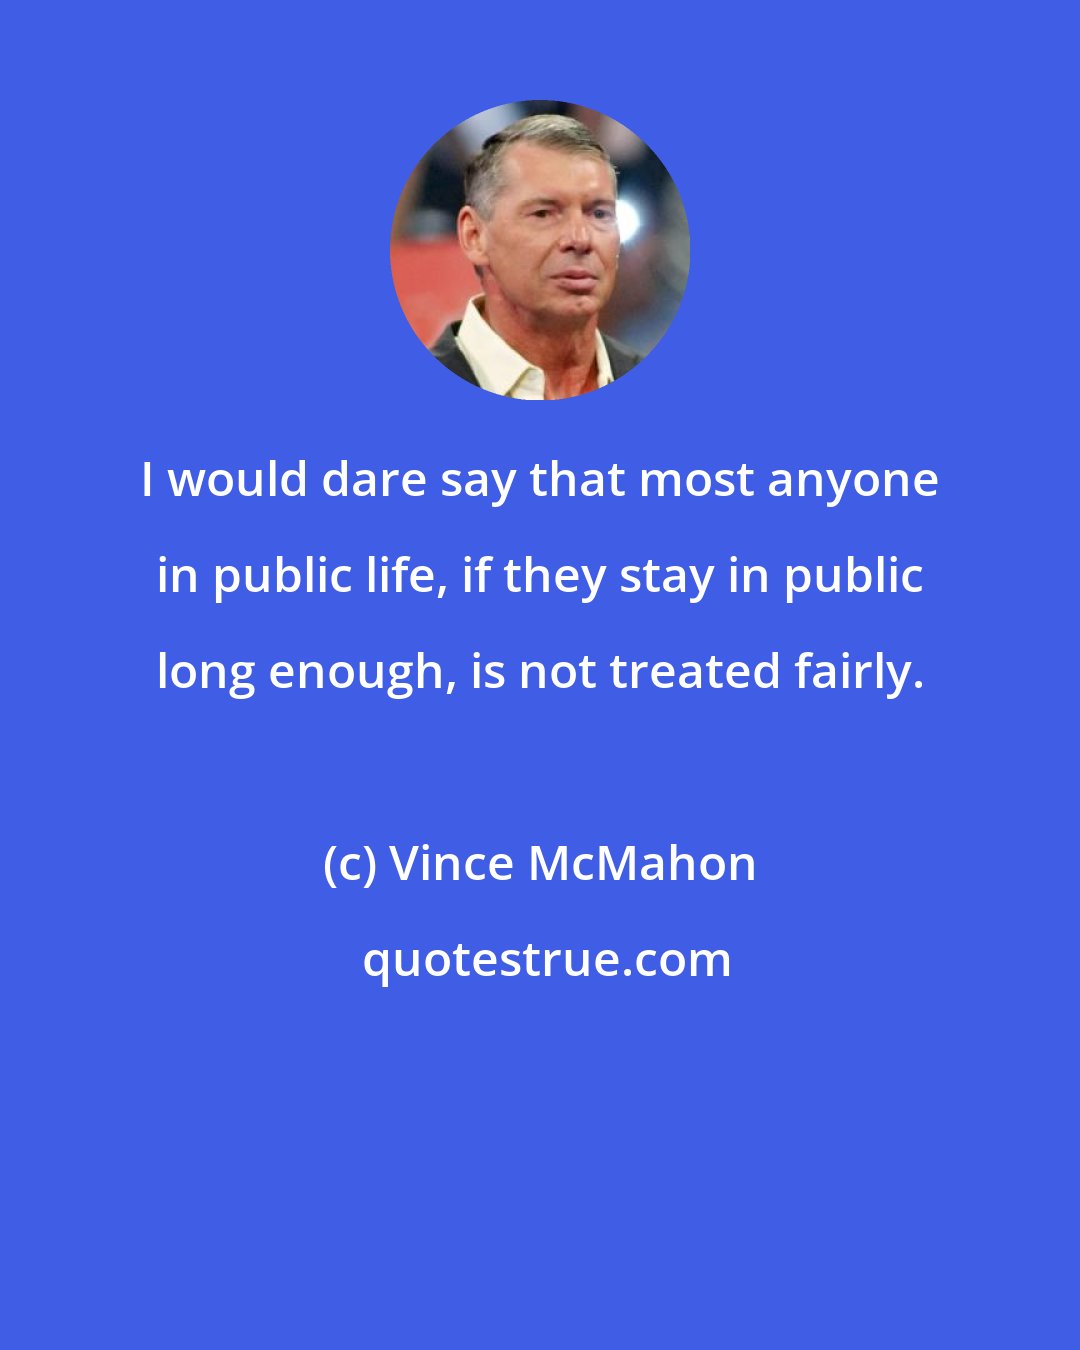 Vince McMahon: I would dare say that most anyone in public life, if they stay in public long enough, is not treated fairly.